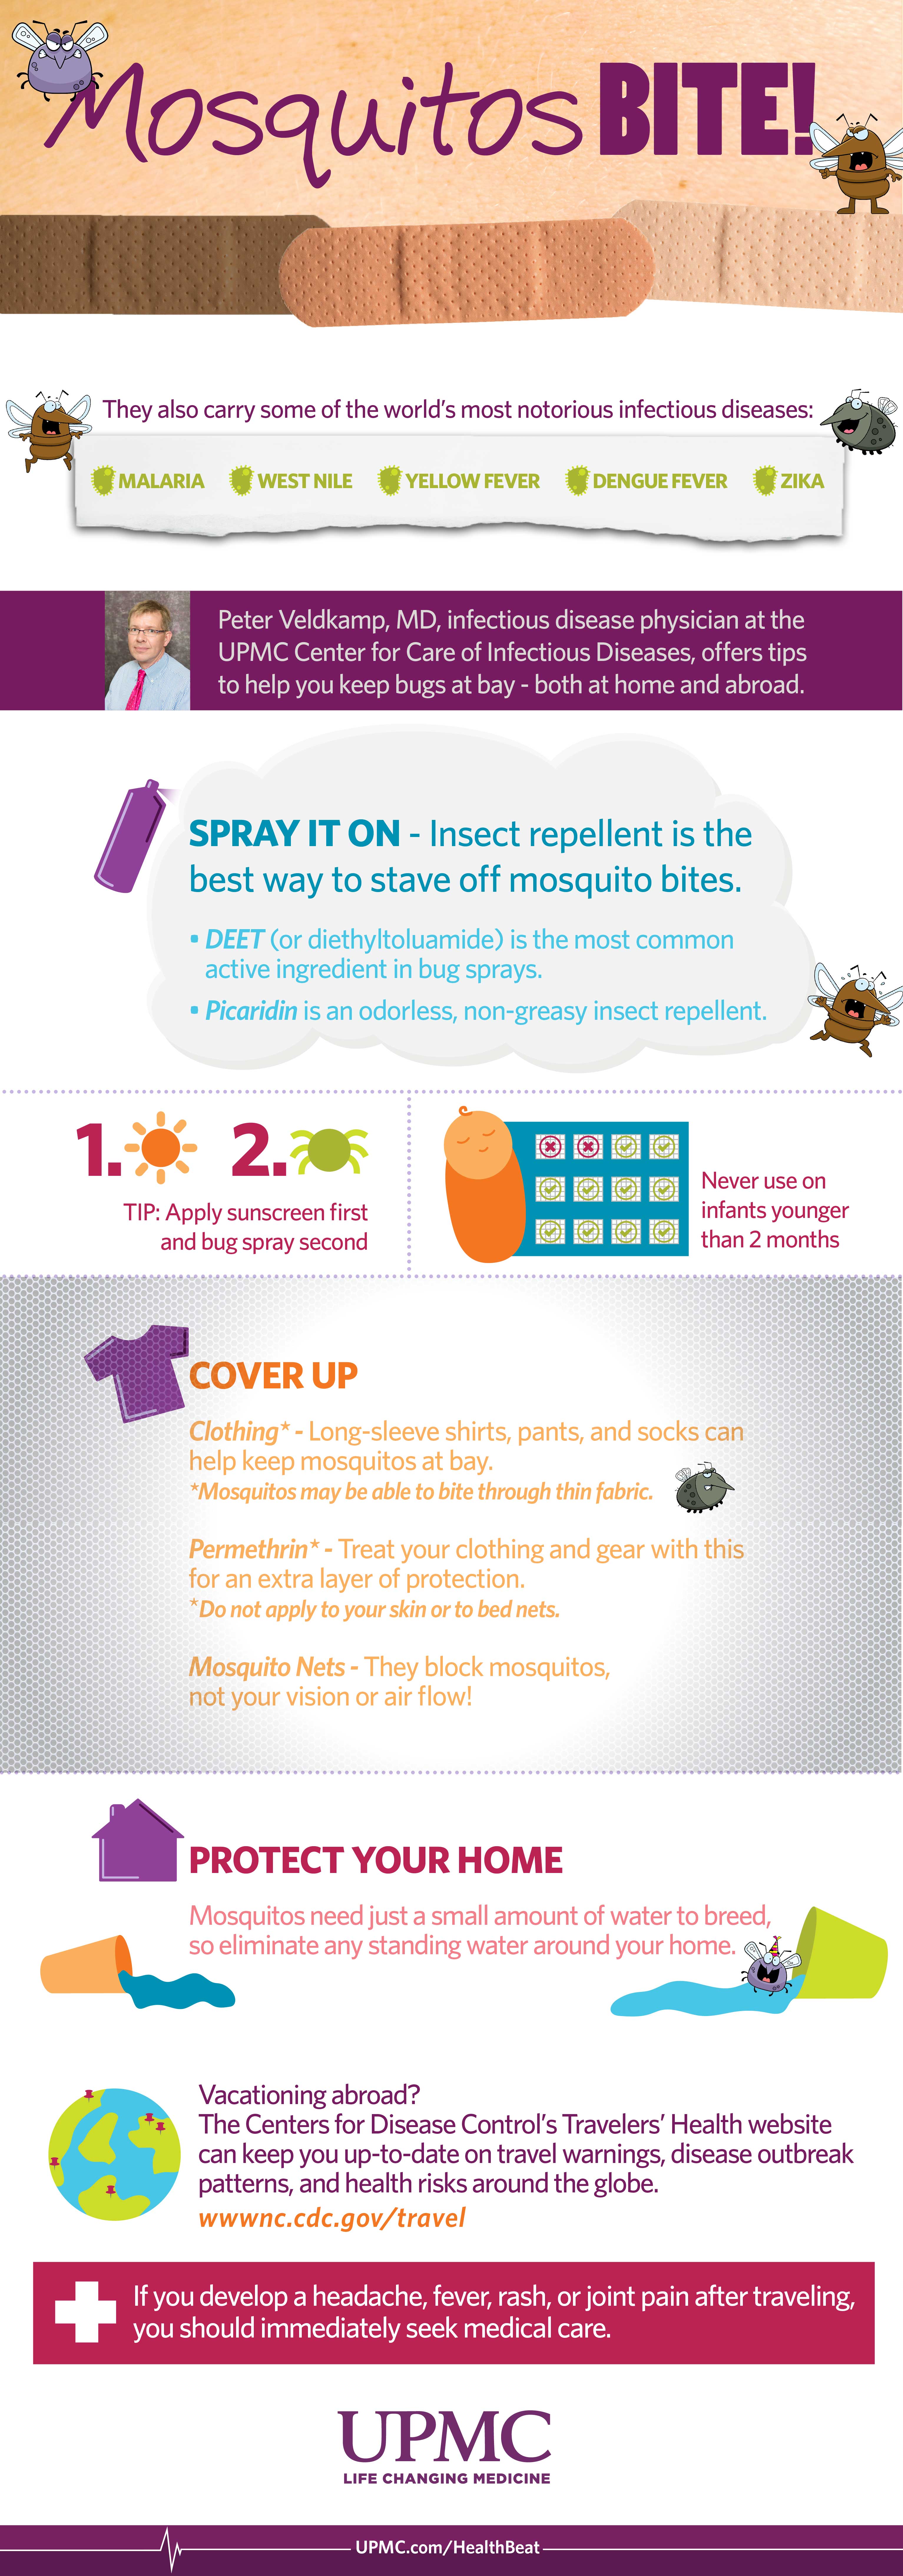 Learn more about how you can prevent pesky mosquito bites